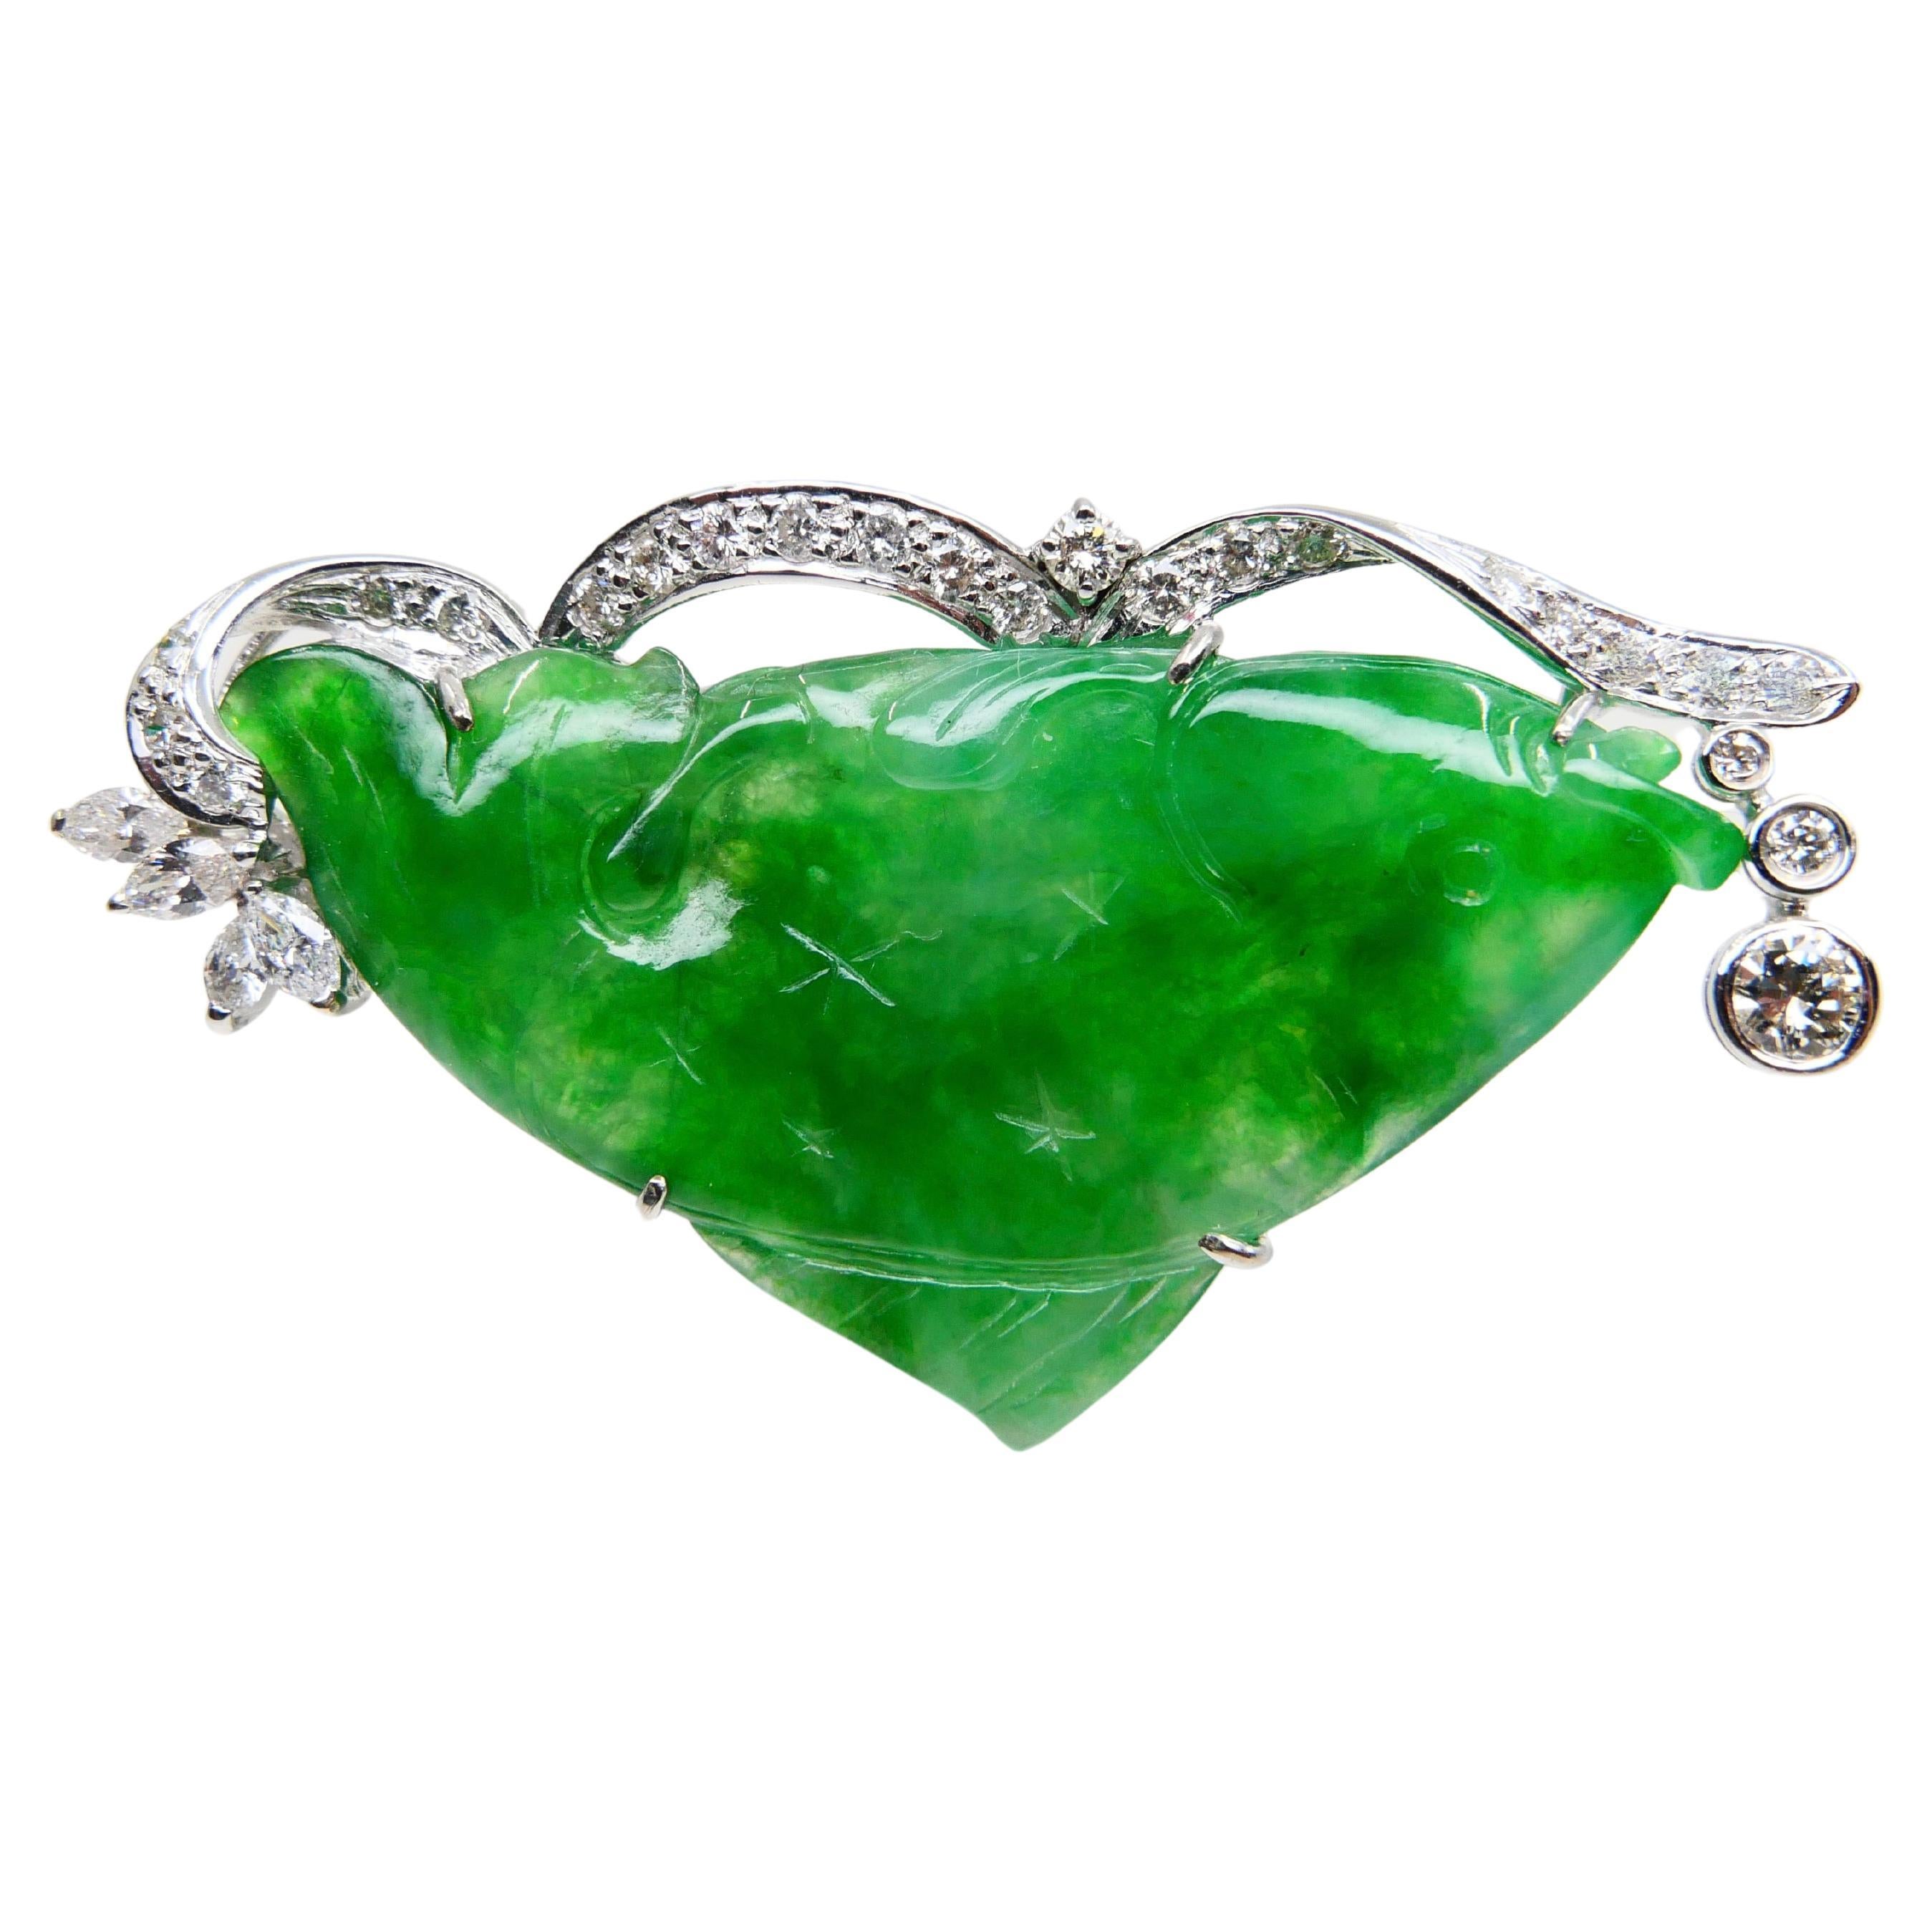 Rough Cut Certified Apple Green Carved Fish Jade & Diamond Brooch, Symbolizes Wealth For Sale